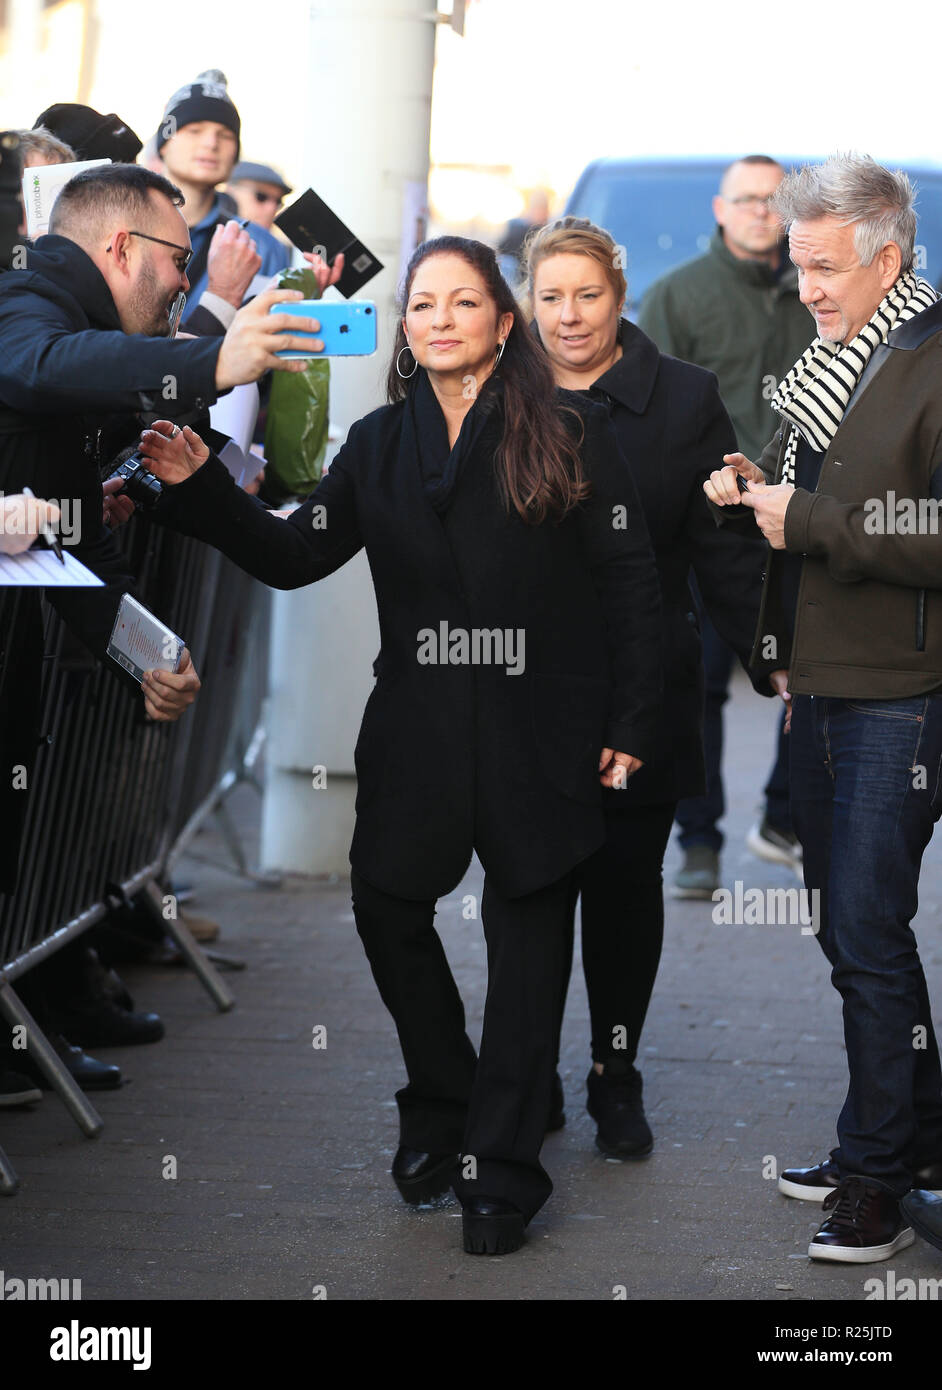 Gloria Estefan arrives at Blackpool Tower Ballroom ahead of Strictly Come Dancing's Saturday evening show. Stock Photo